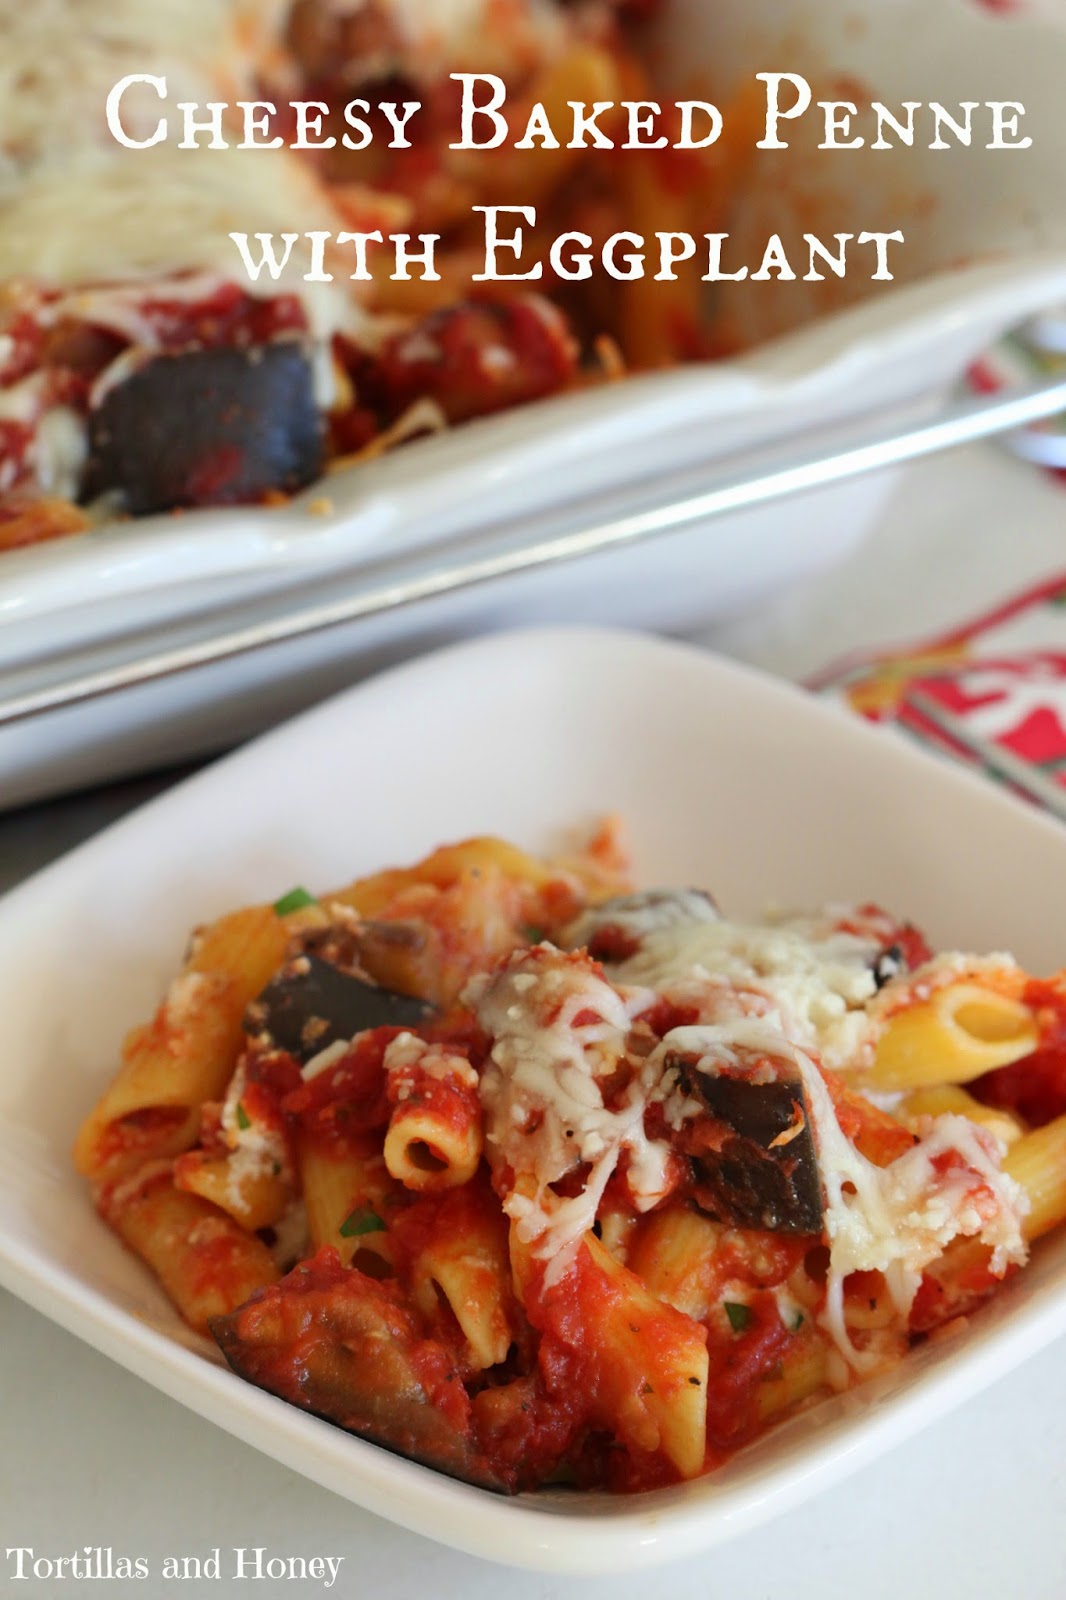 Cheesy Baked Penne with Eggplant | Tortillas and Honey